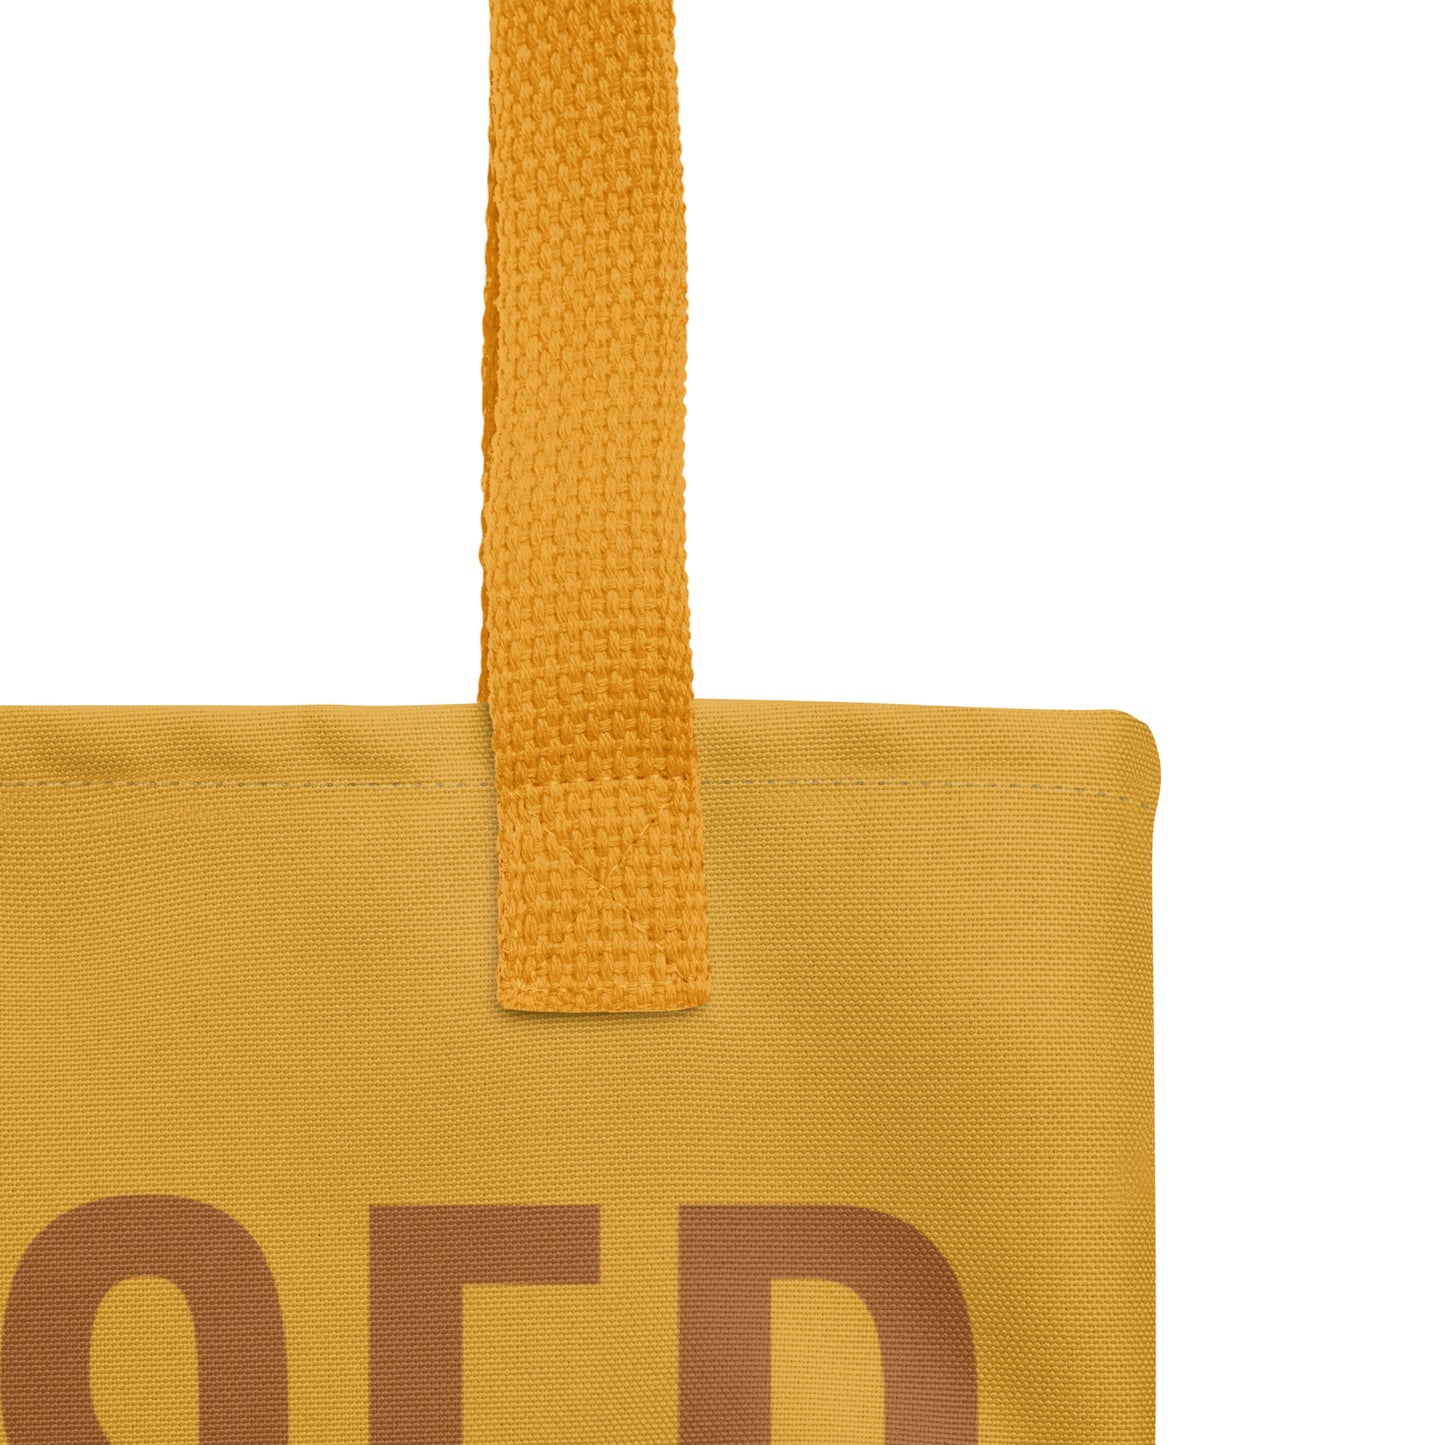 Cool original tote bag in yellow, with BLESSED text, and flower monoline design